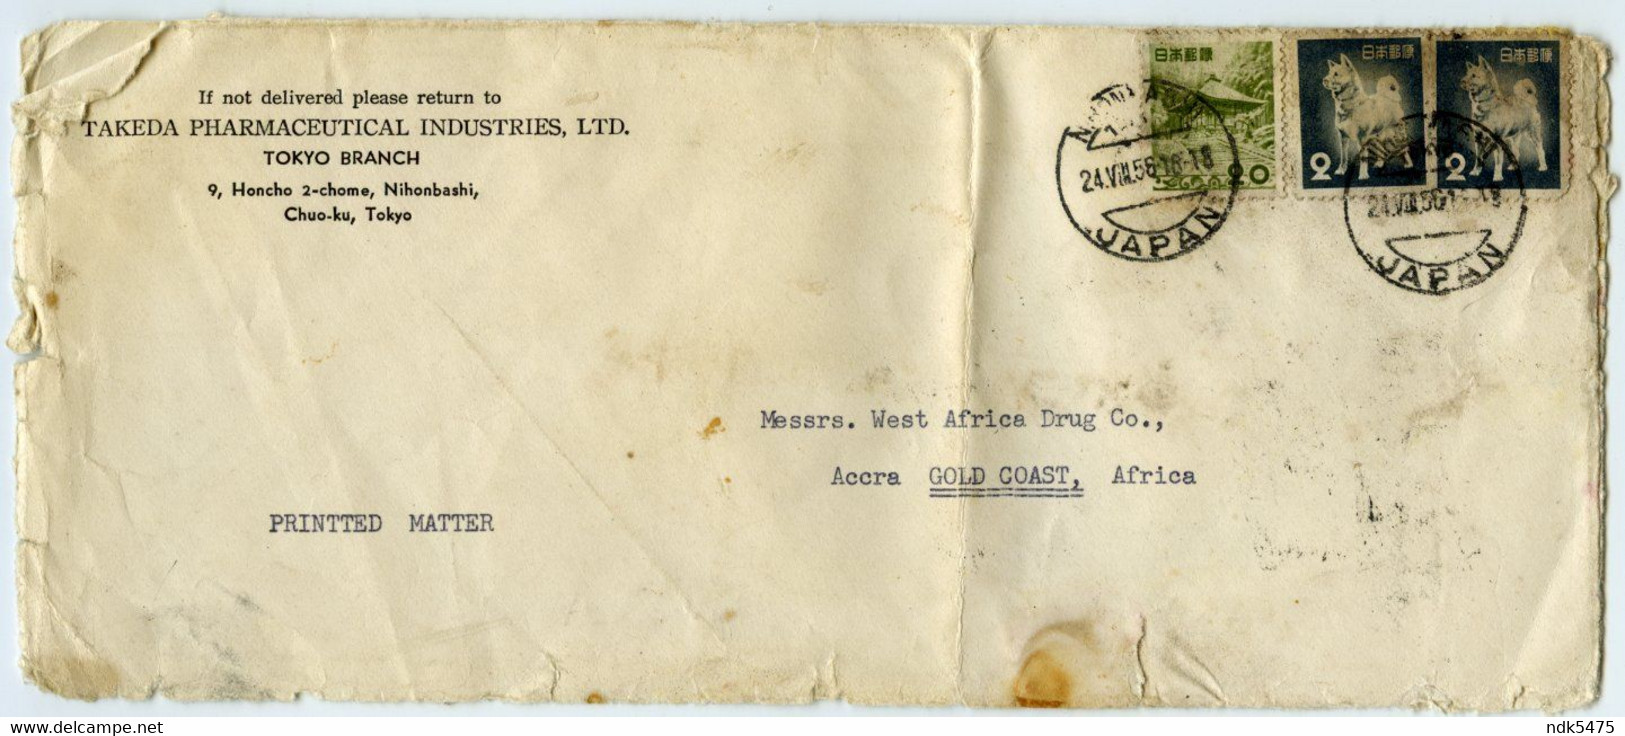 JAPAN : TAKEDA PHARMACEUTICAL INDUSTRIES, TOKYO / GOLD COAST, ACCRA, WEST AFRICAN DRUG CO., 1956 - Lettres & Documents